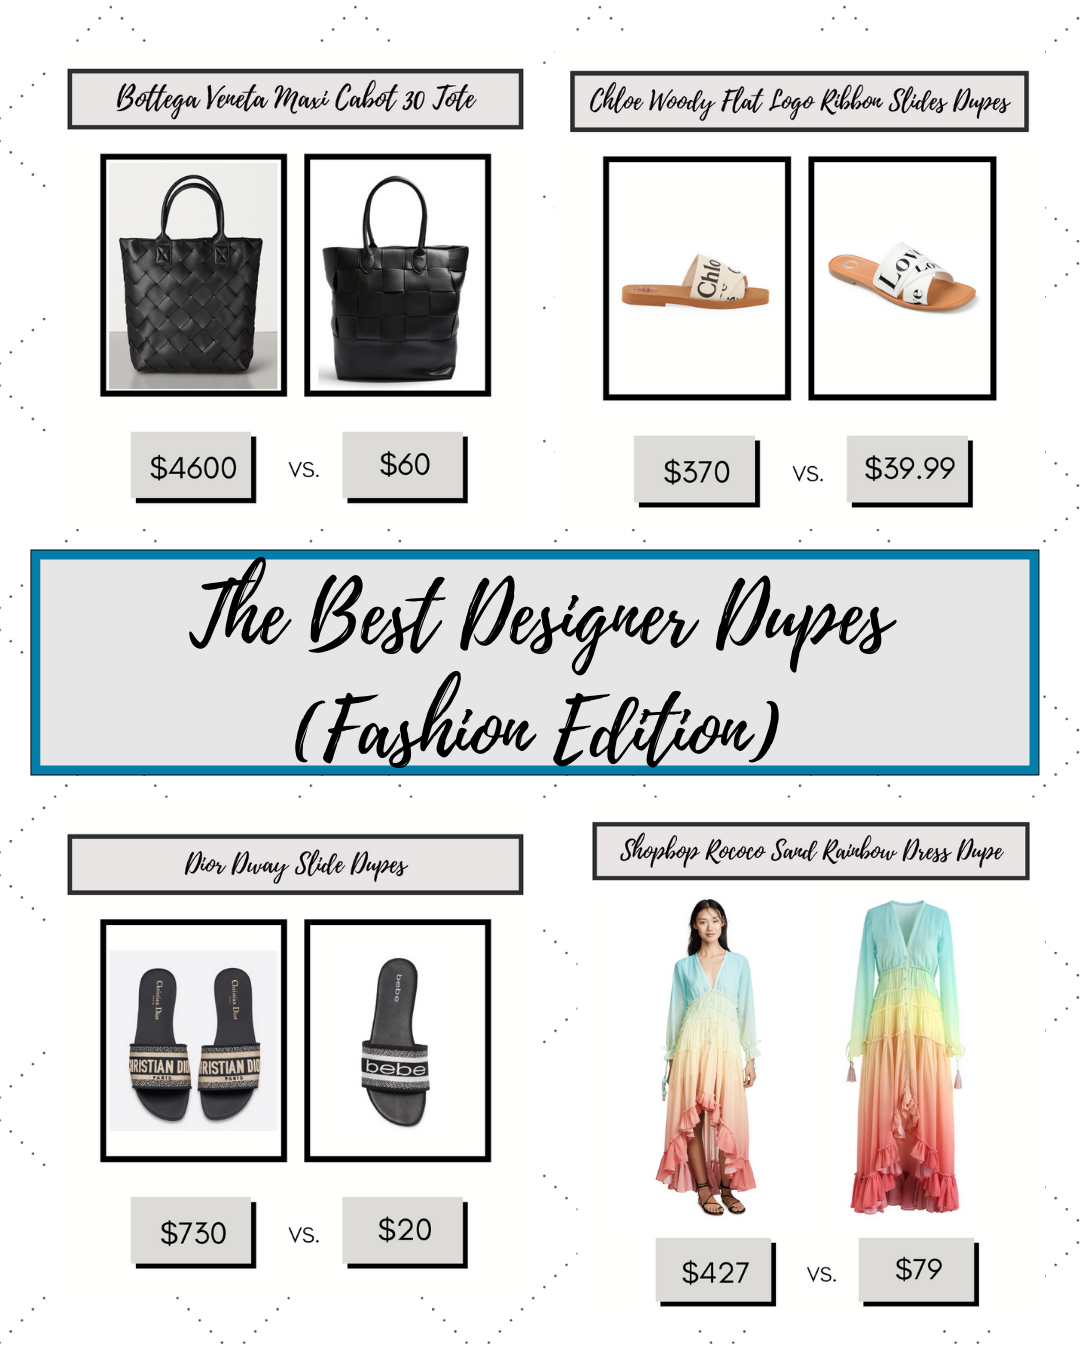 http://recycledrosesguide.com/wp-content/uploads/2021/04/The-Best-Designer-Dupes.png